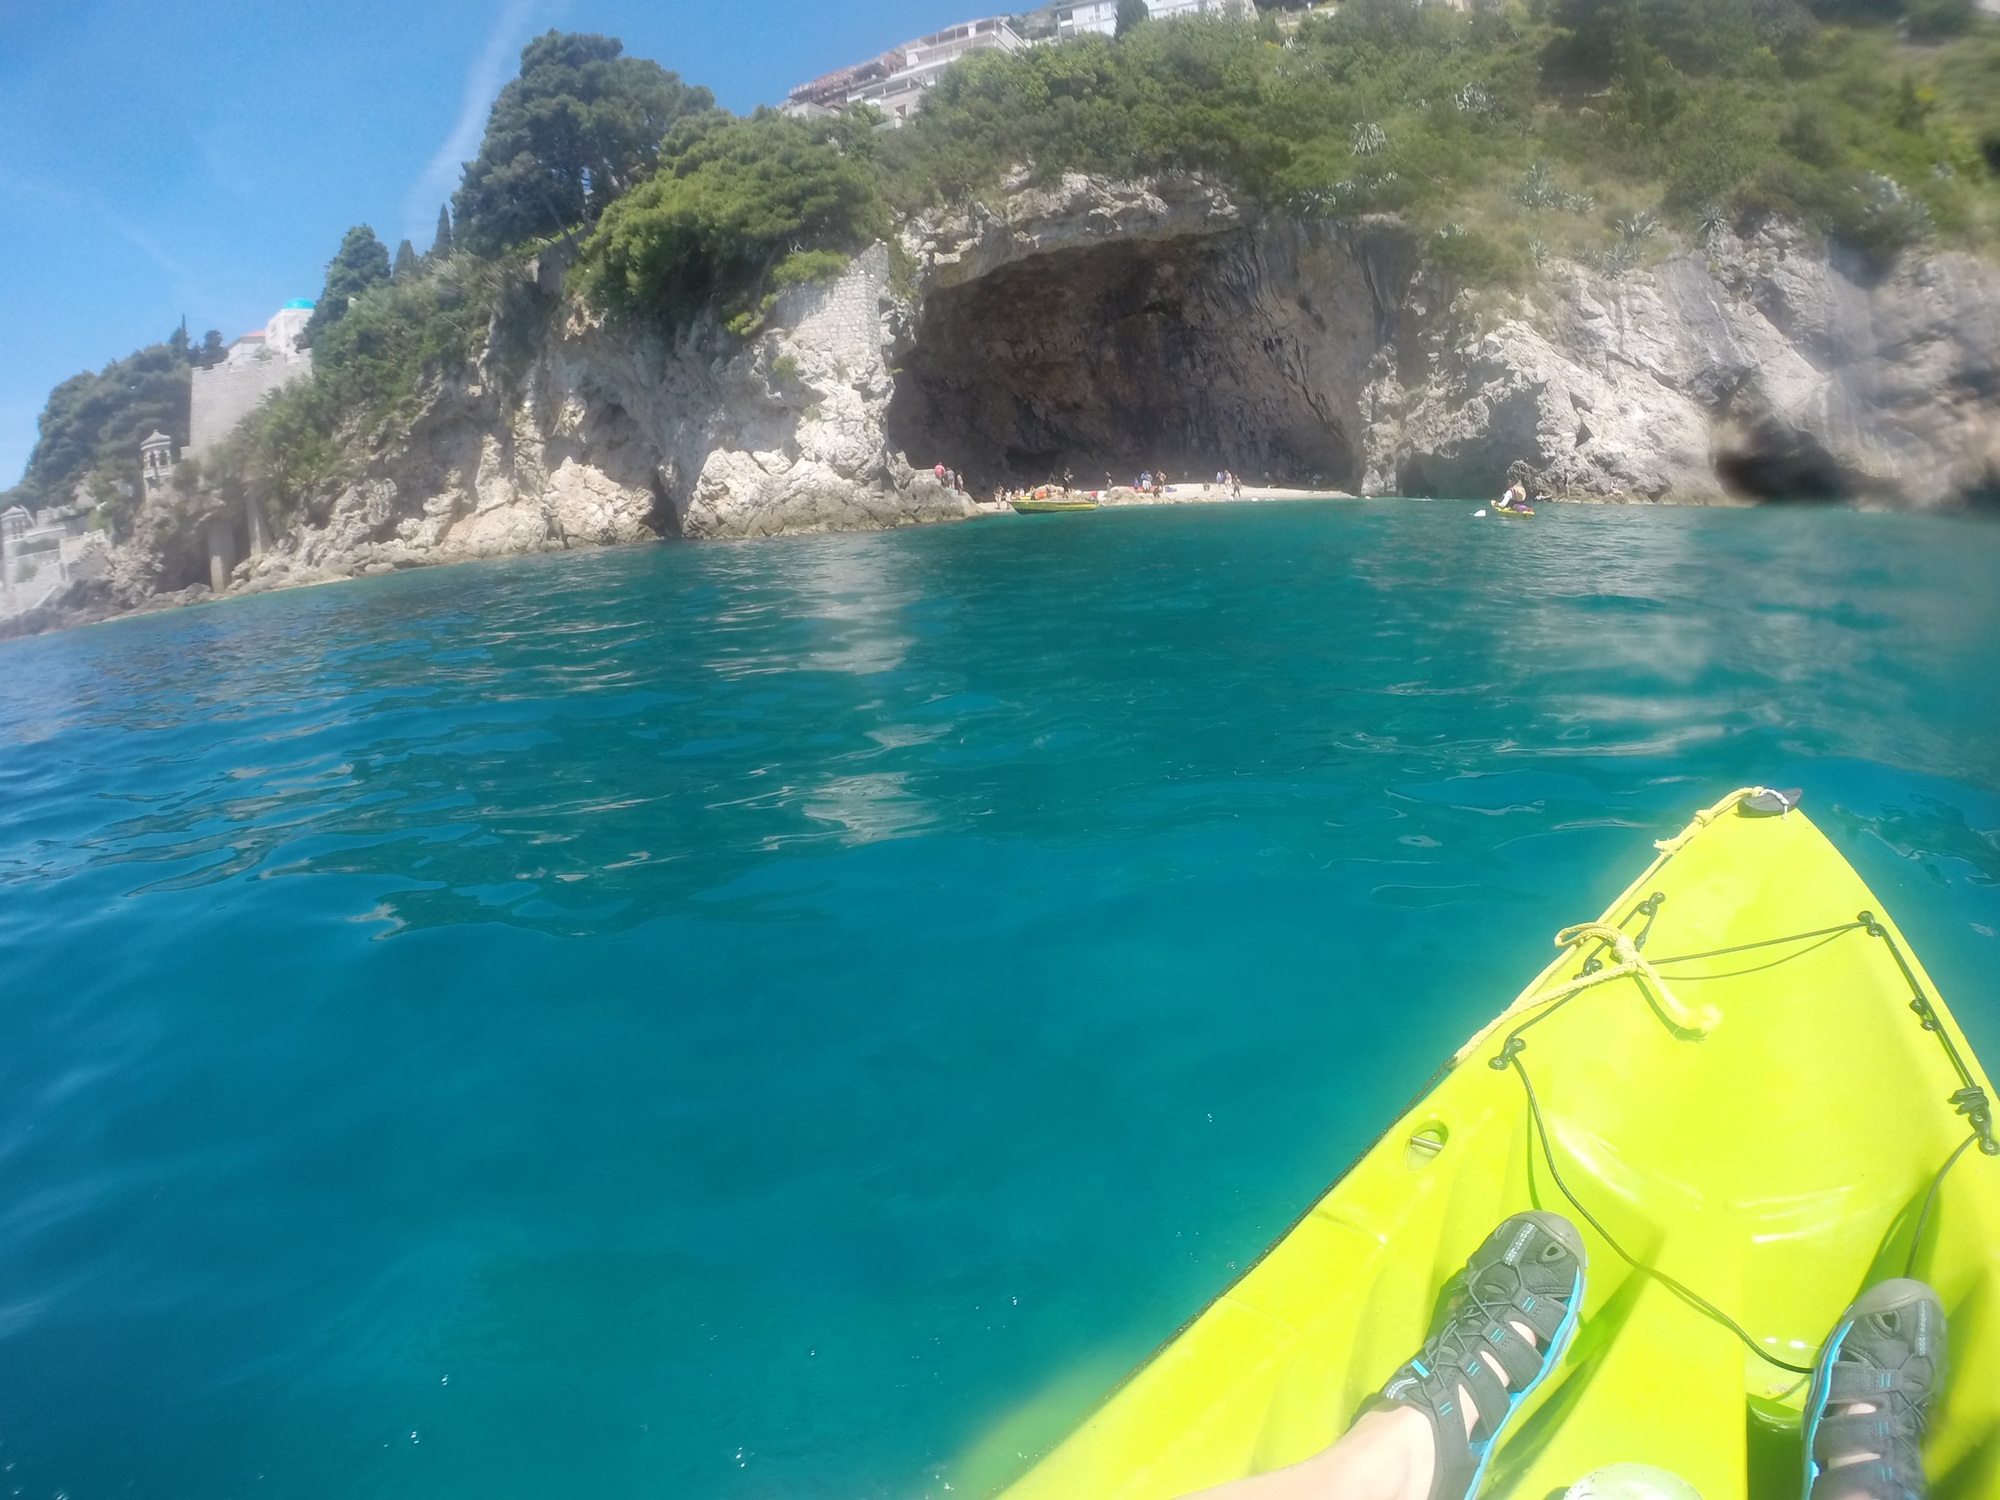 A blurry view of Betina Beach on the kayak tour out of Dubrovnik.